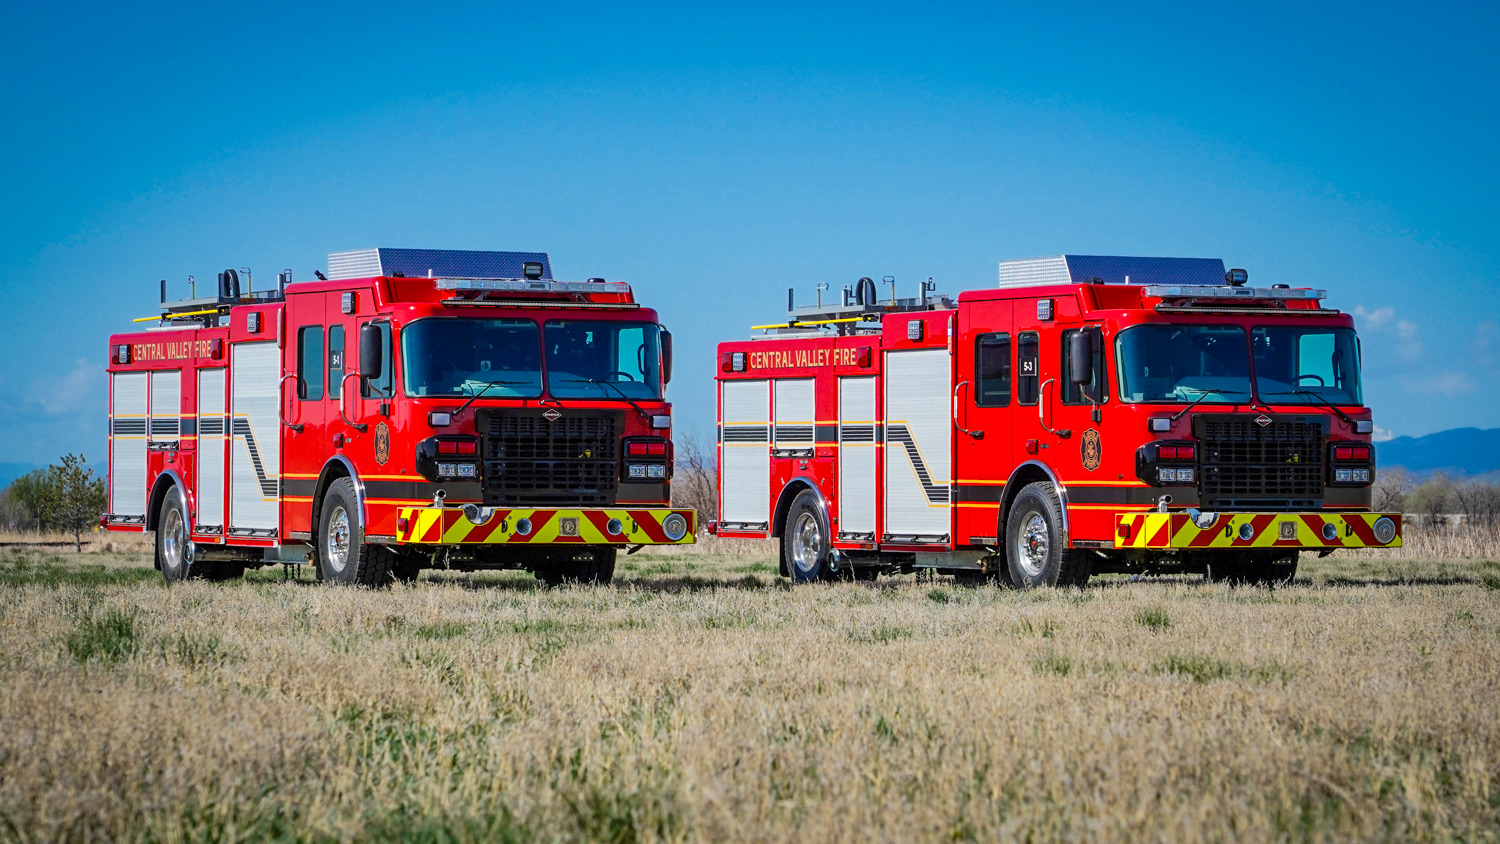 Featured image for “Central Valley Fire District (MT) Rescue Pumper #1225-1226”